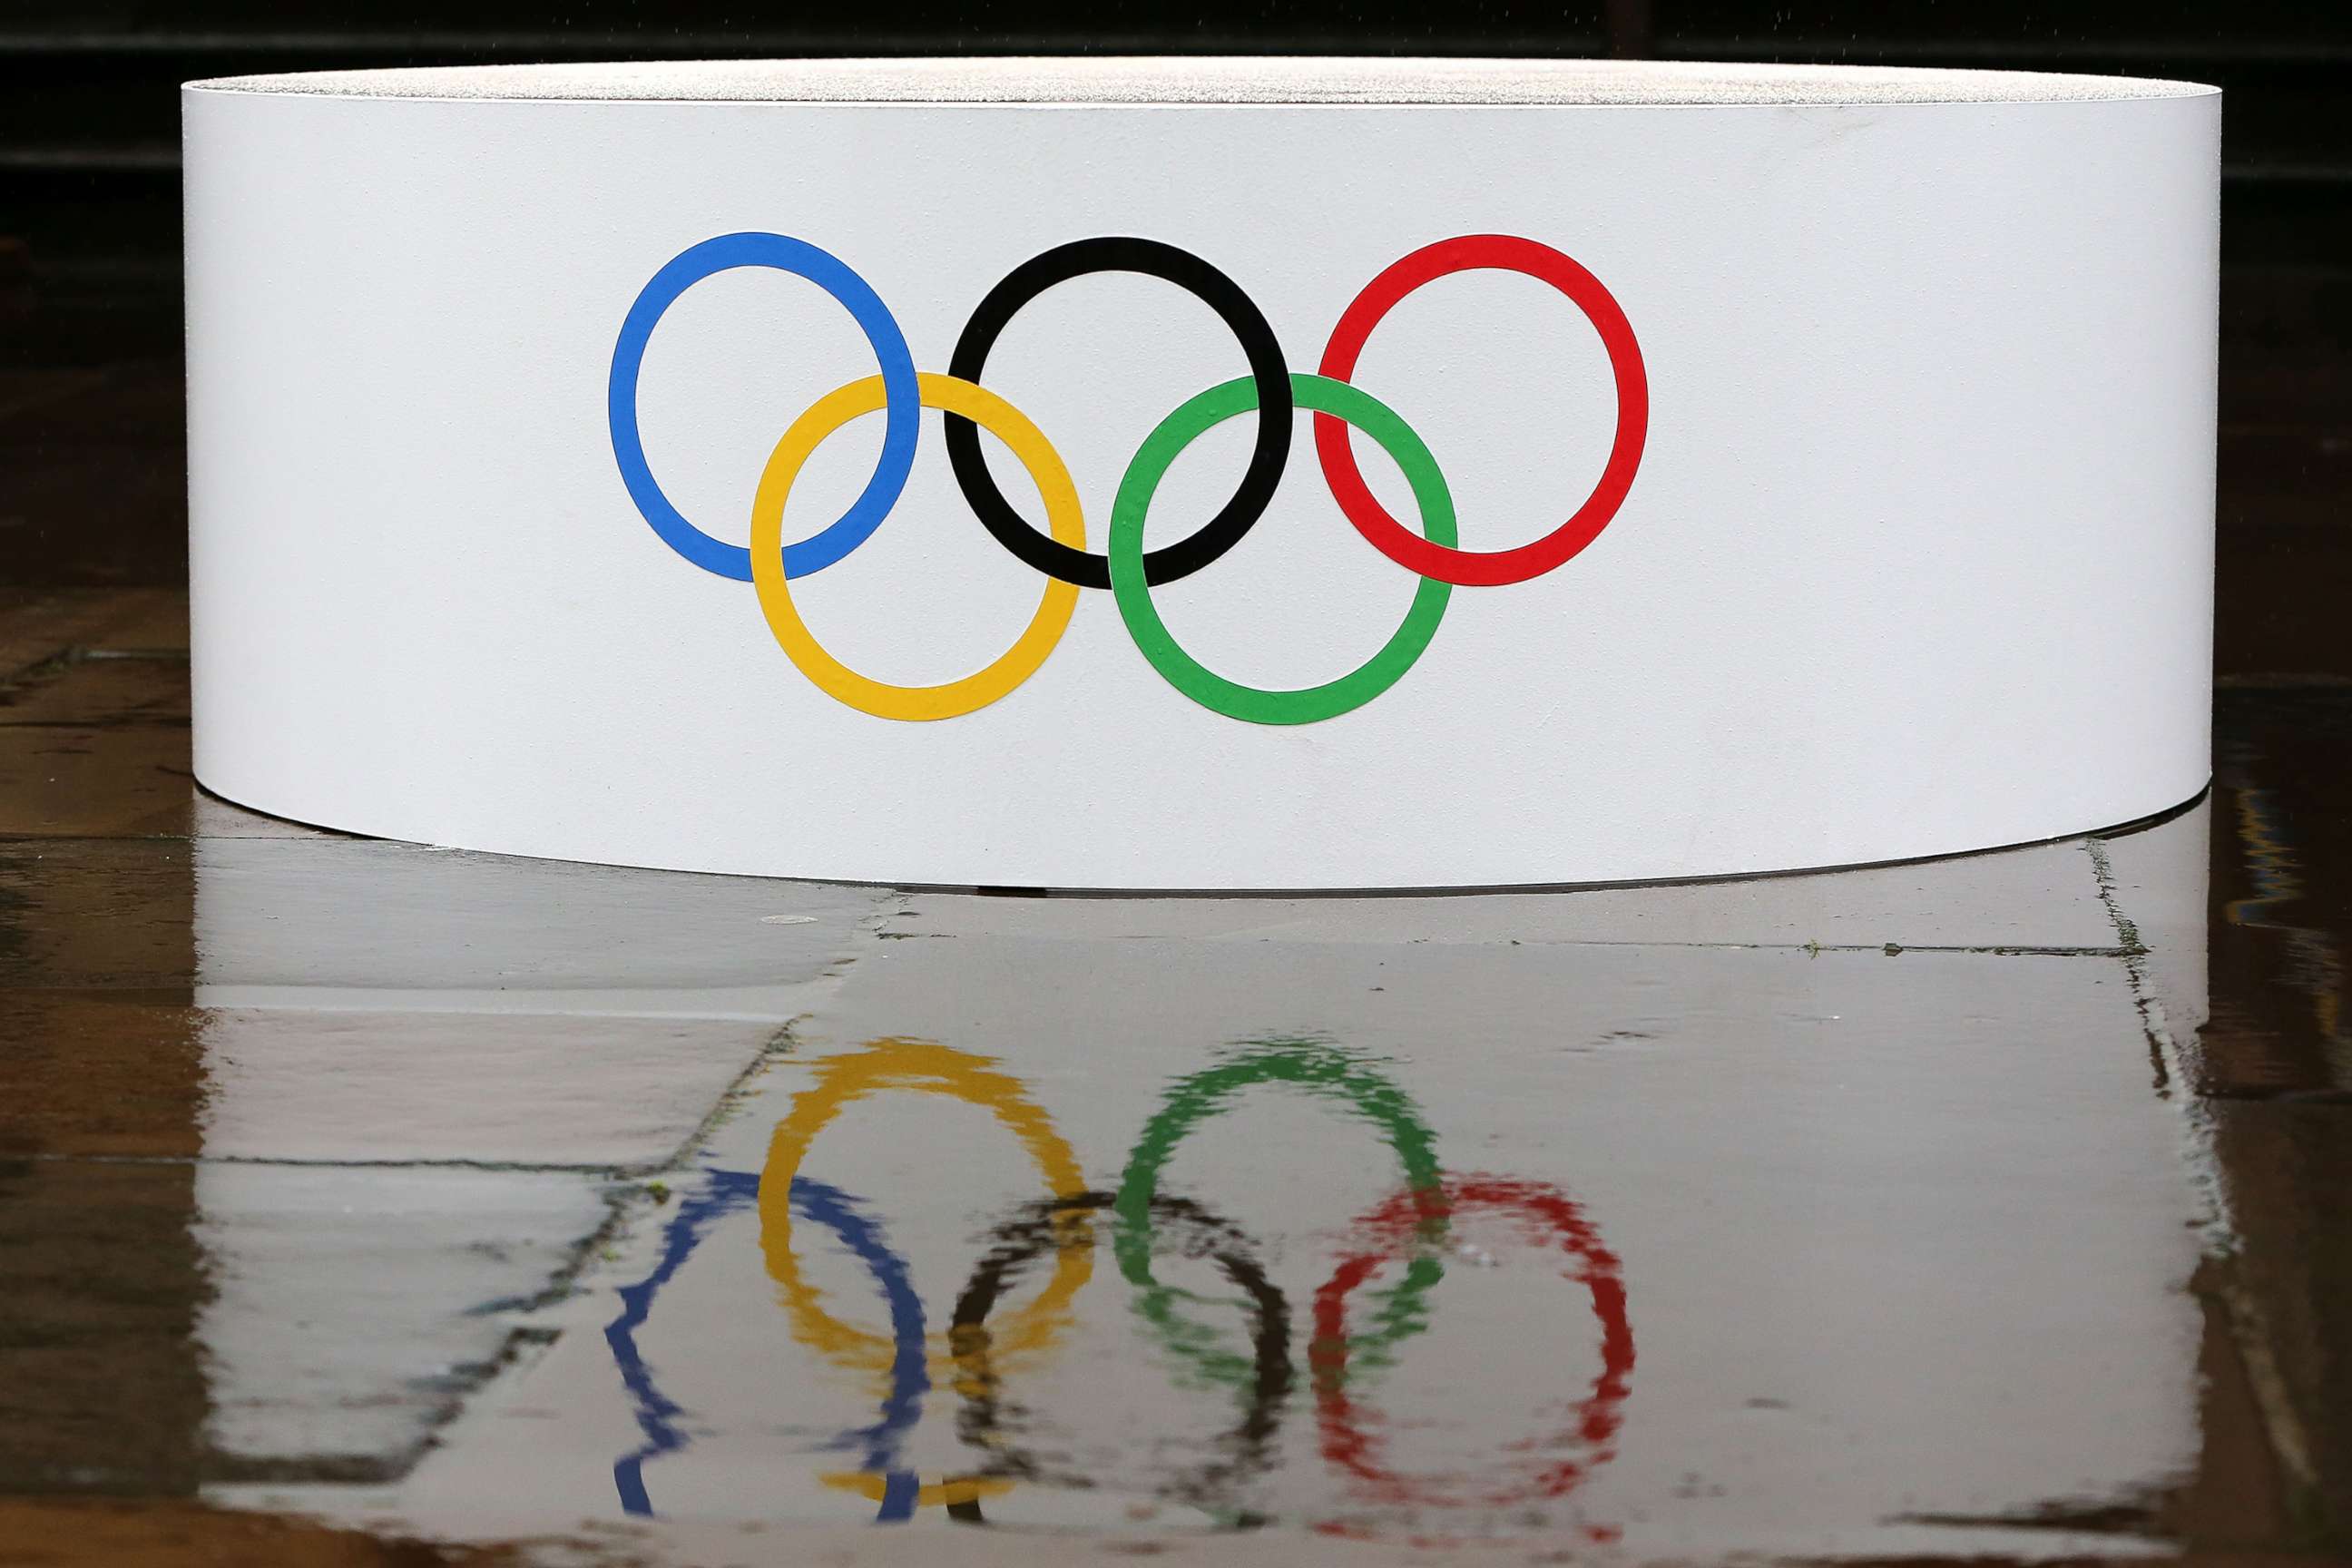 PHOTO: In this June 17, 2016, file photo, the Olympic rings are seen at a presentation in Melbourne, Australia.